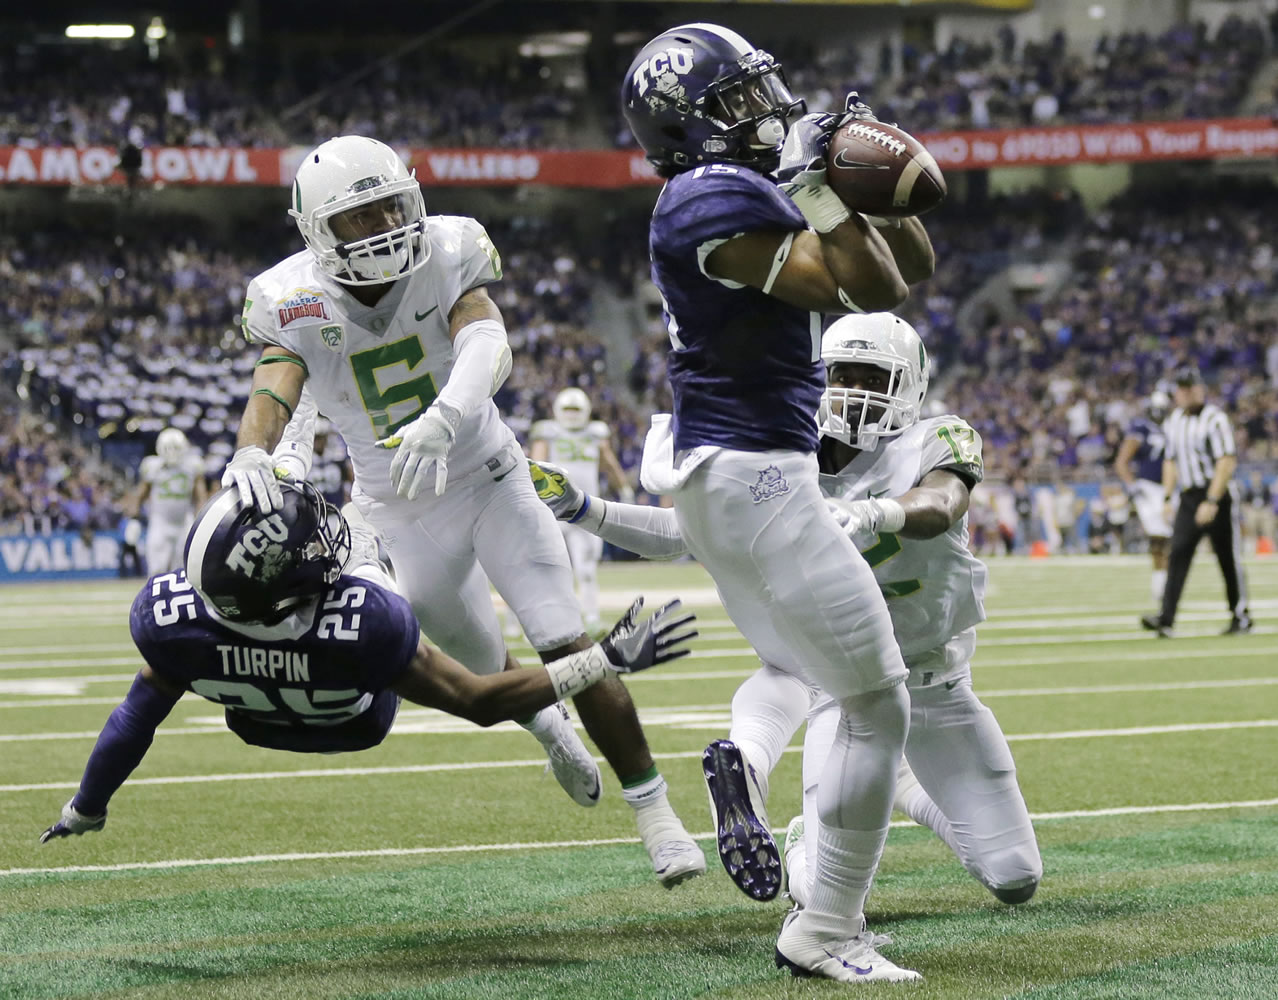 TCU wide receiver Jaelan Austin (15) catches a touchdown pass in front of Oregon cornerback Chris Seisay (12) during the second half of the Alamo Bowl NCAA college football game, Saturday, Jan. 2, 2016, in San Antonio.